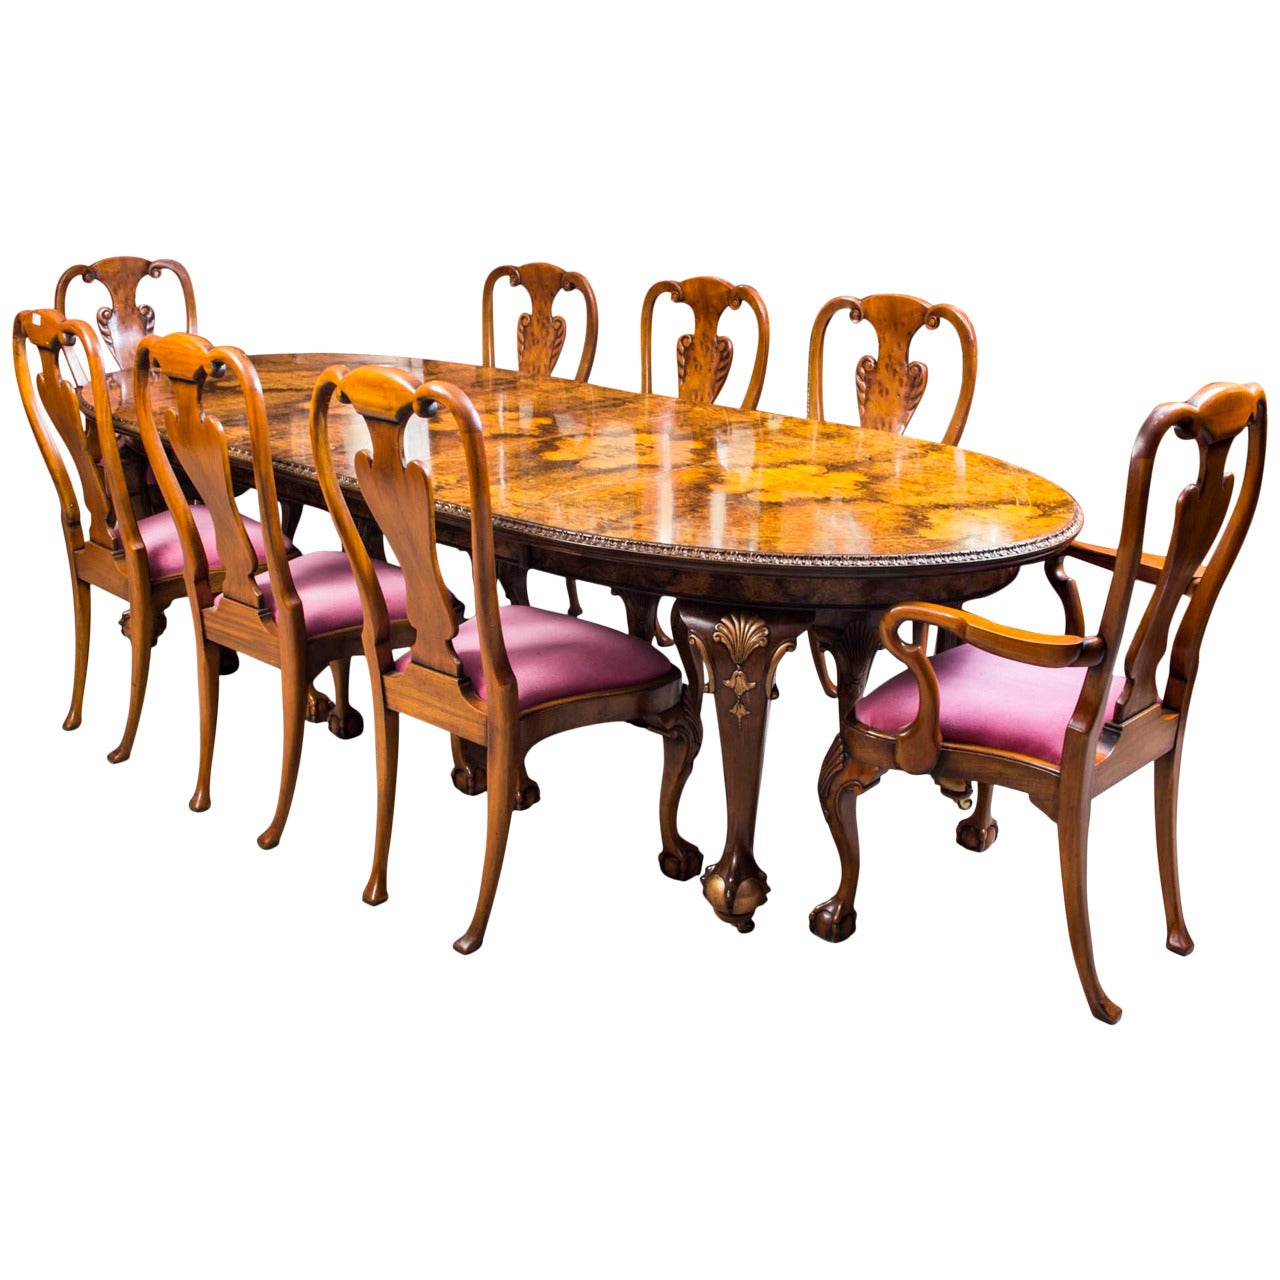 Antique Queen Anne Style Dining Table and Eight Chairs, circa 1920